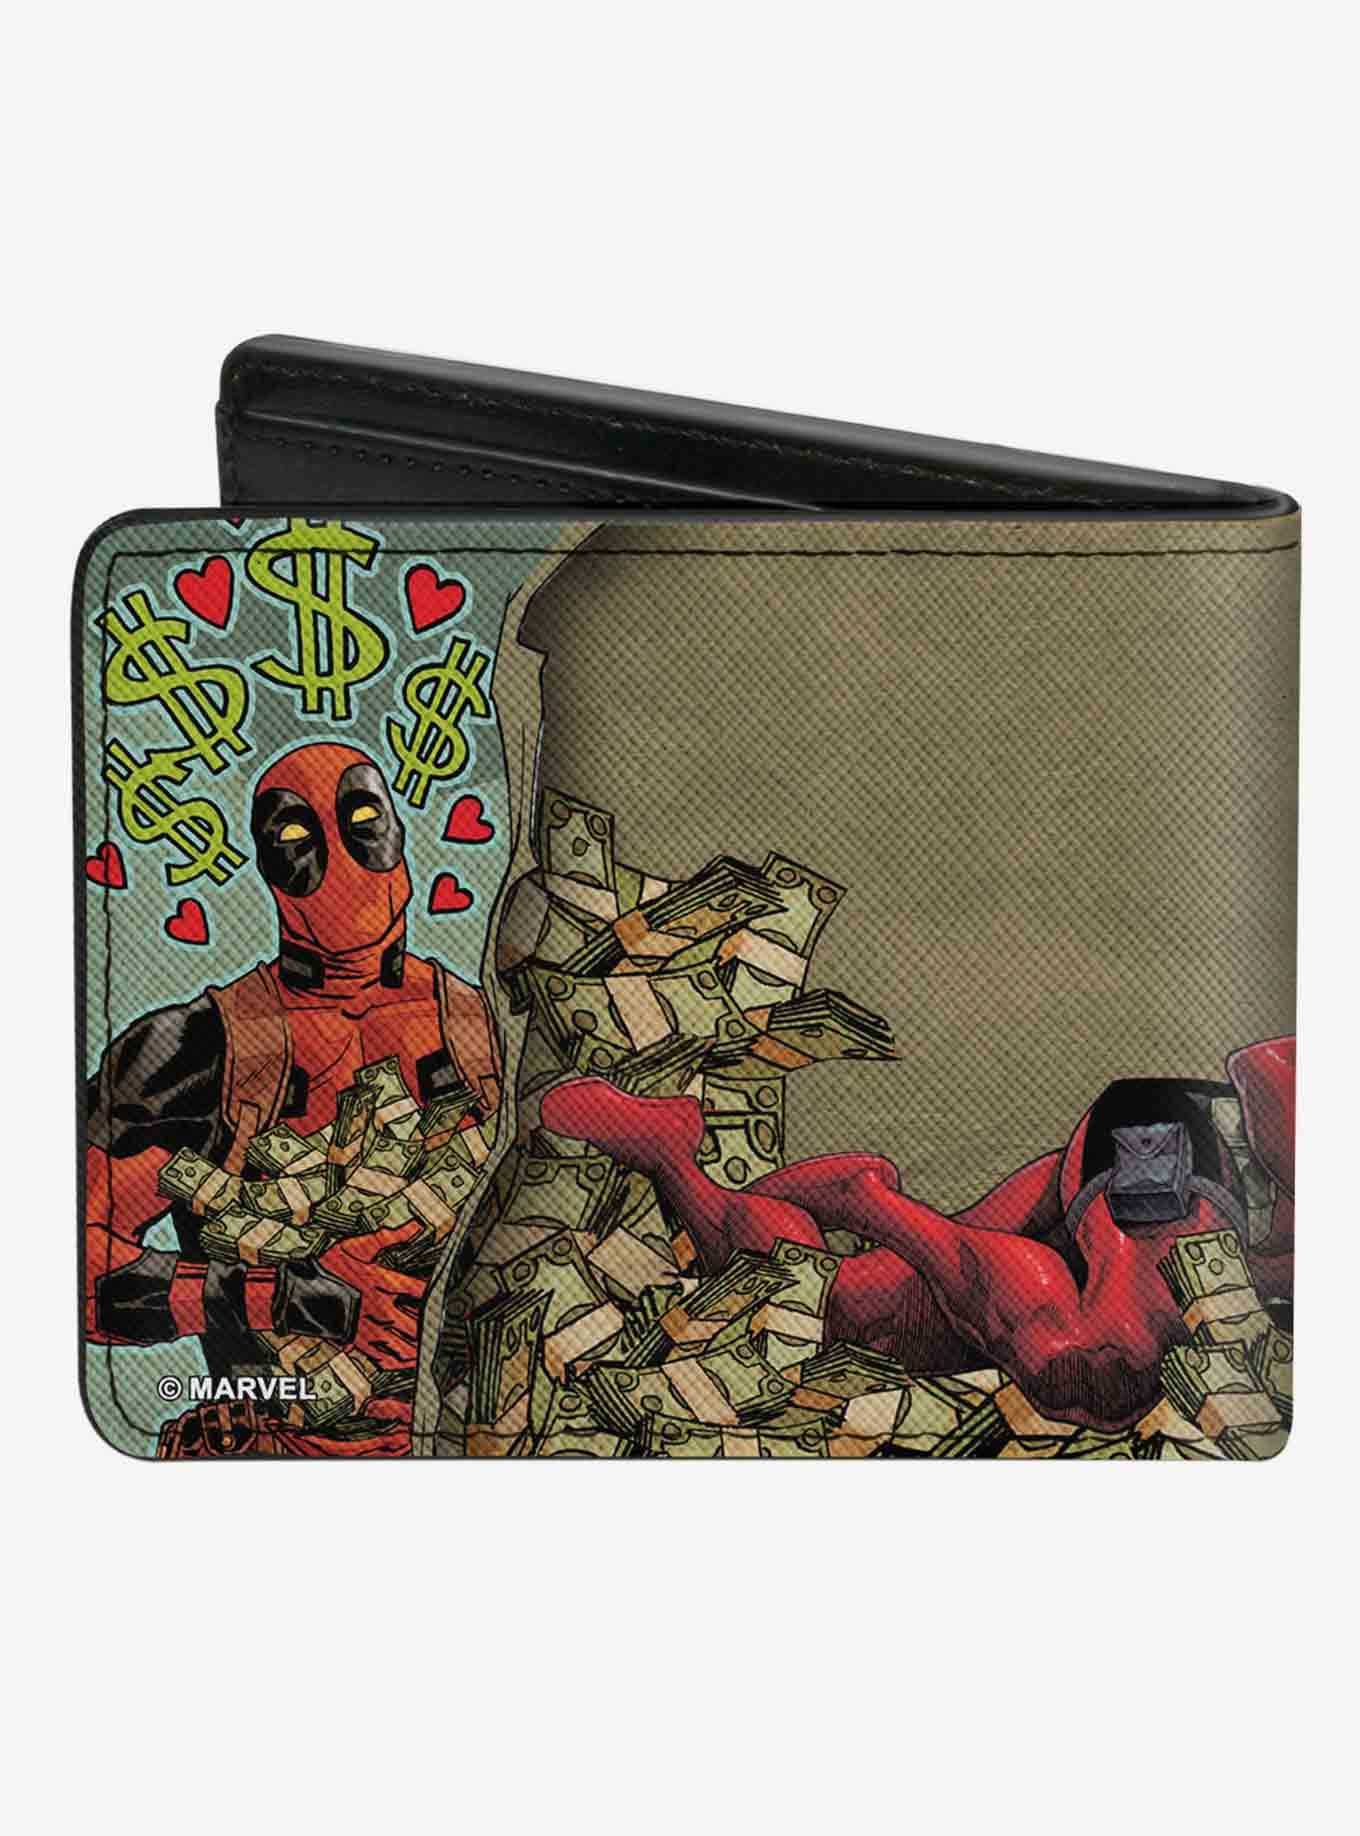 Marvel Deadpool Royalties Are The Quote Money Poses Bifold Wallet, , hi-res